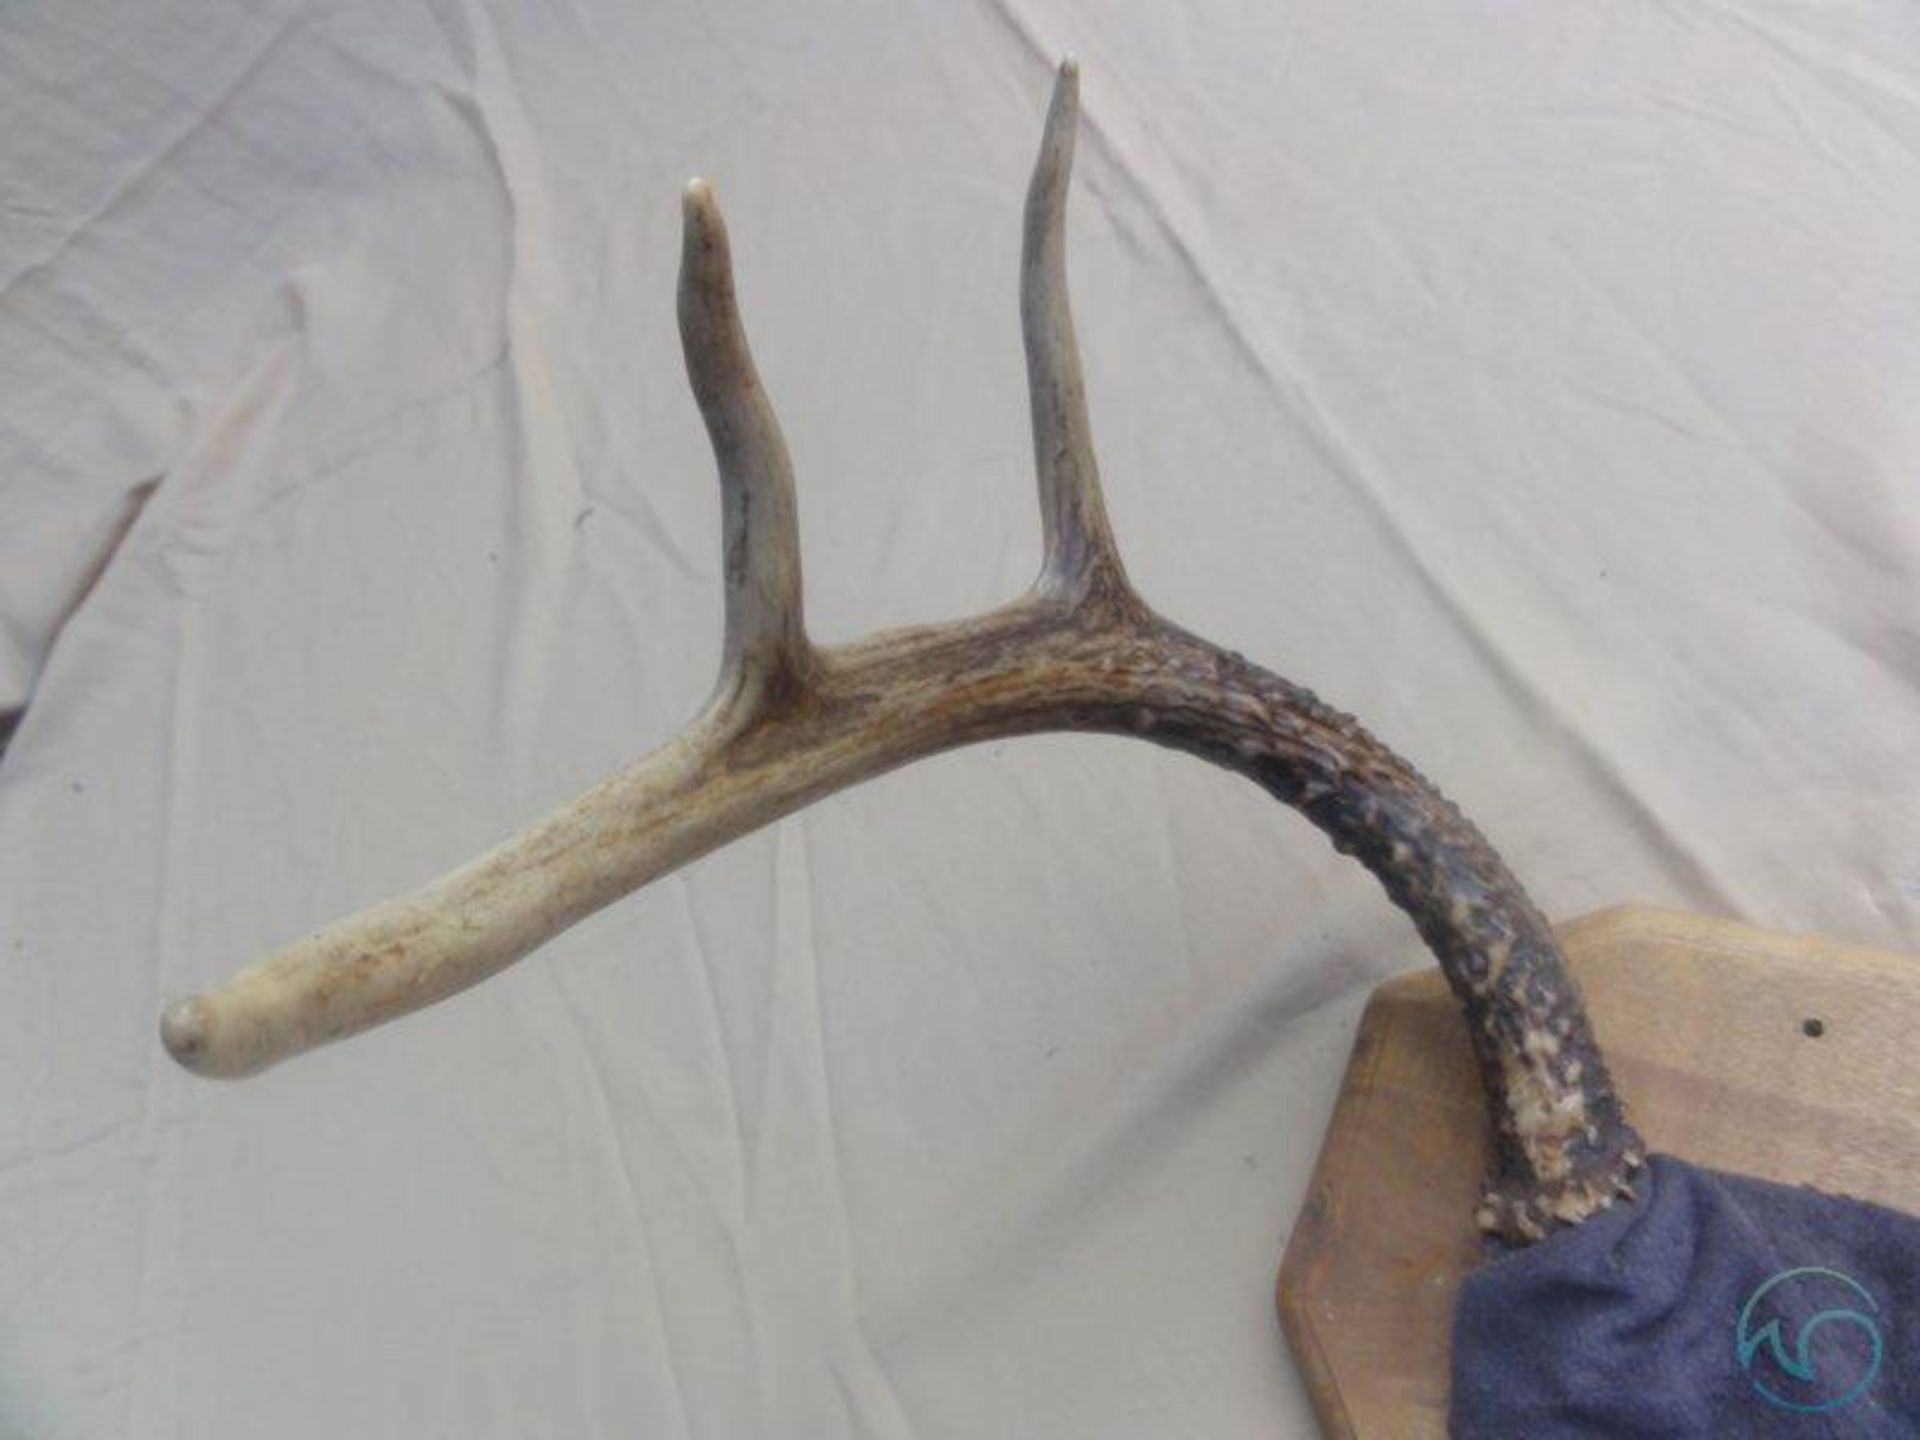 6-Point Antler Mount. - Image 3 of 3